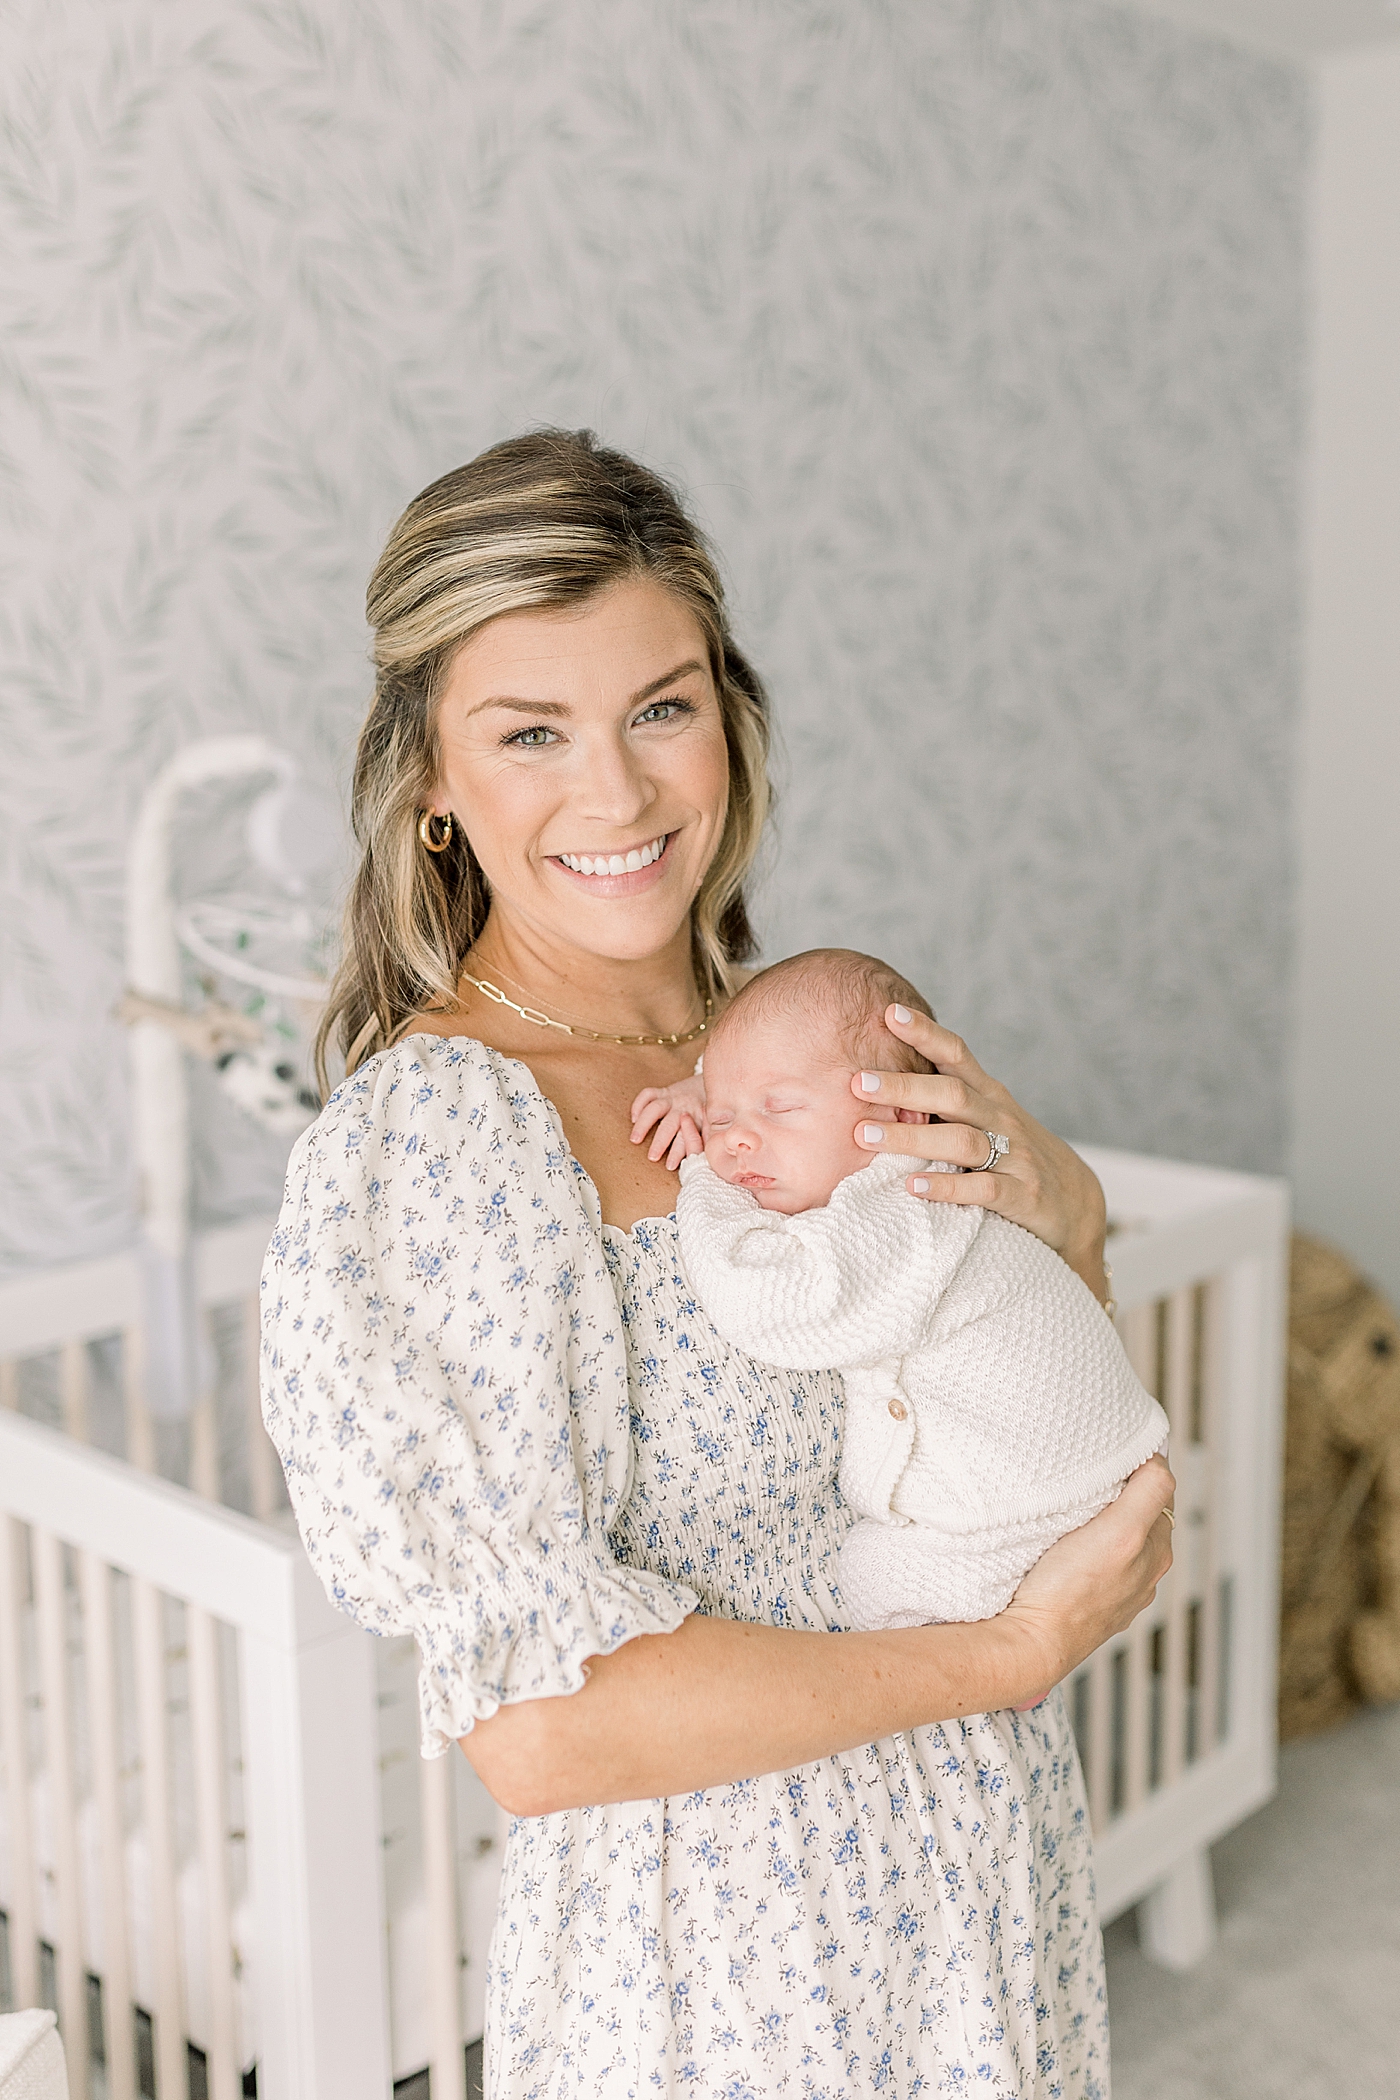 Mom smiling holding baby boy in his nursery | Photo by Caitlyn Motycka Photography